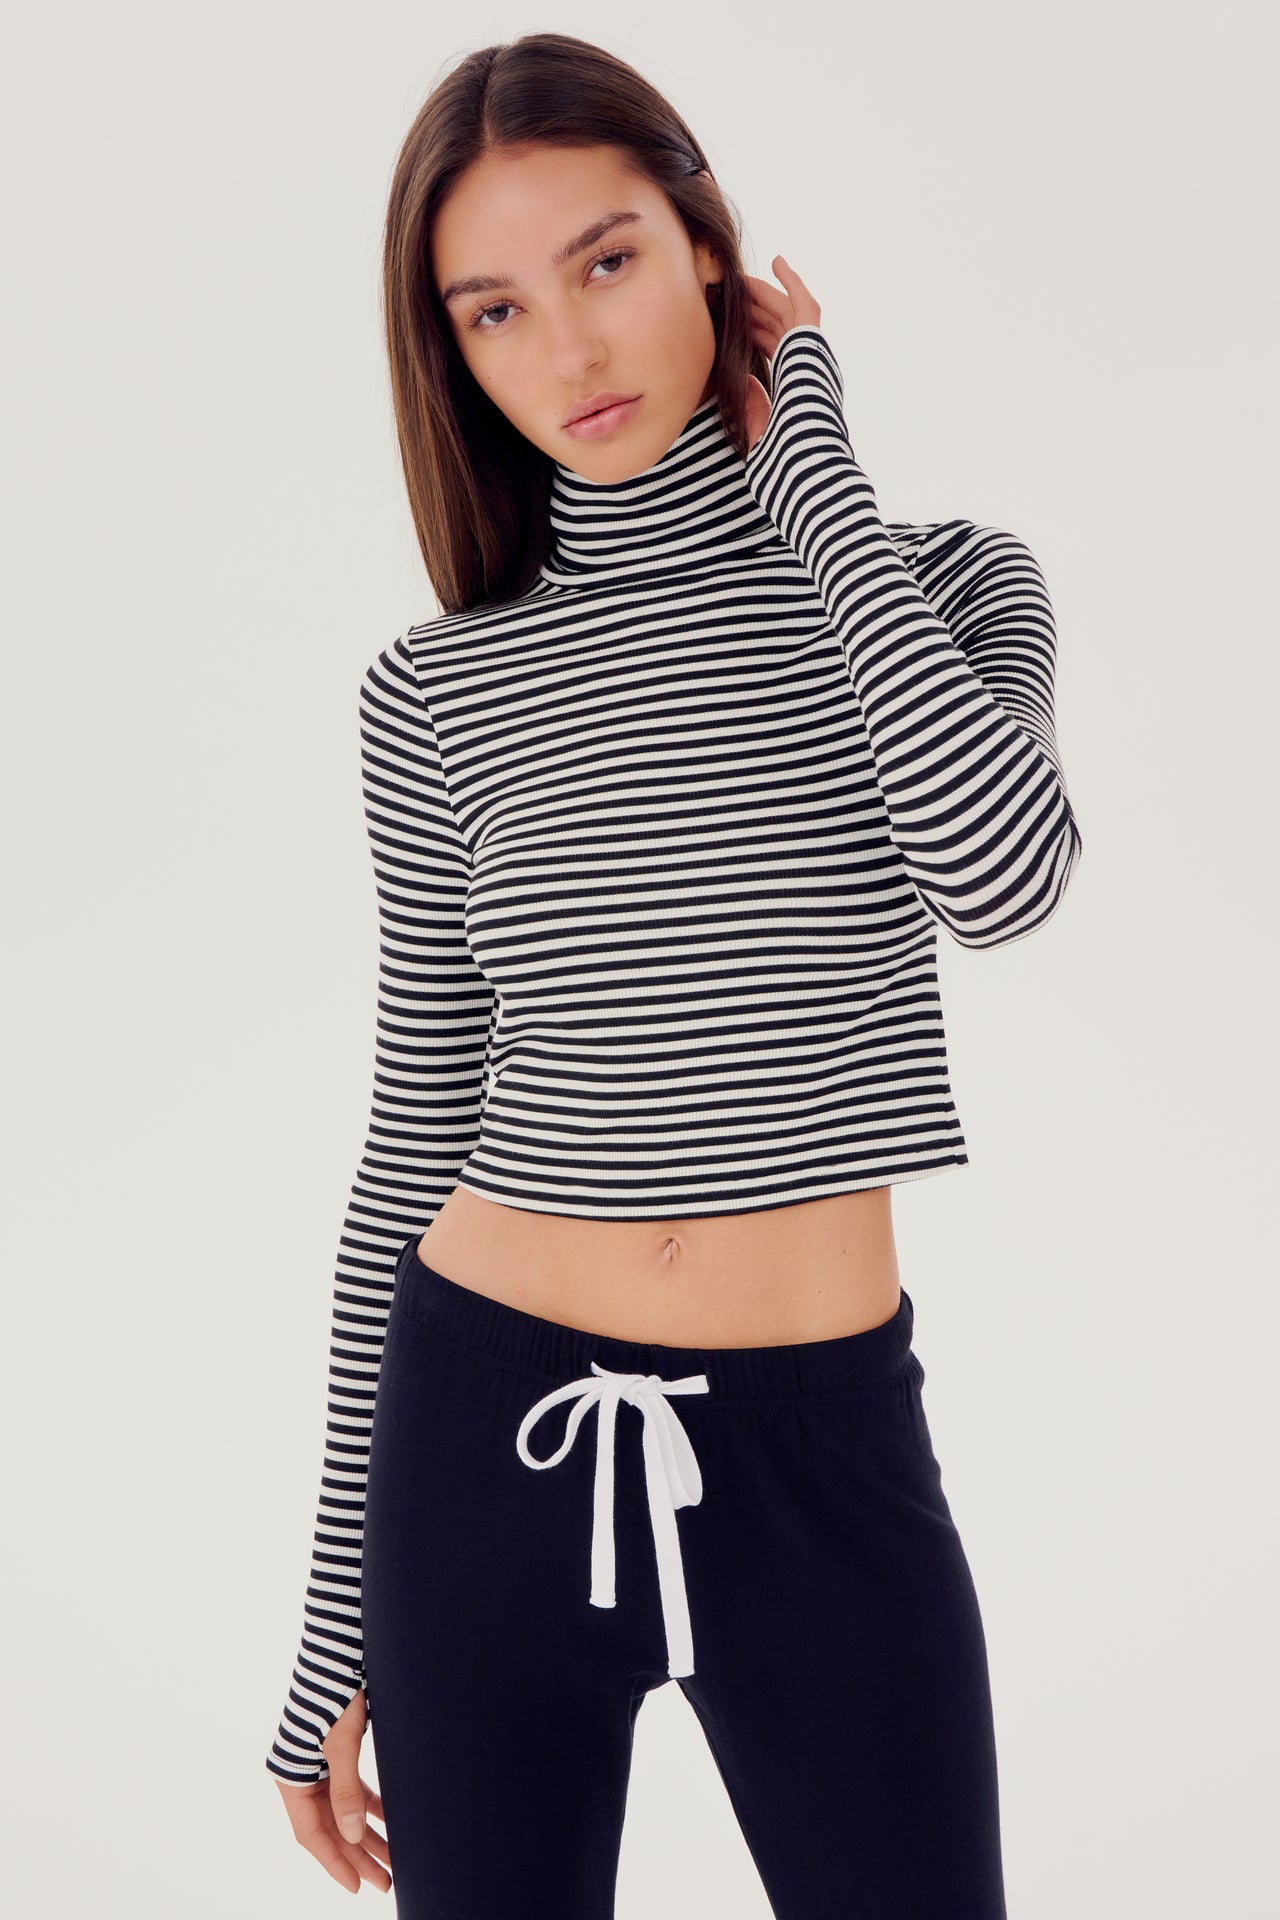 The model is wearing a black and white striped SPLITS59 Jackson Rib Cropped Turtleneck top and black high waist leggings.